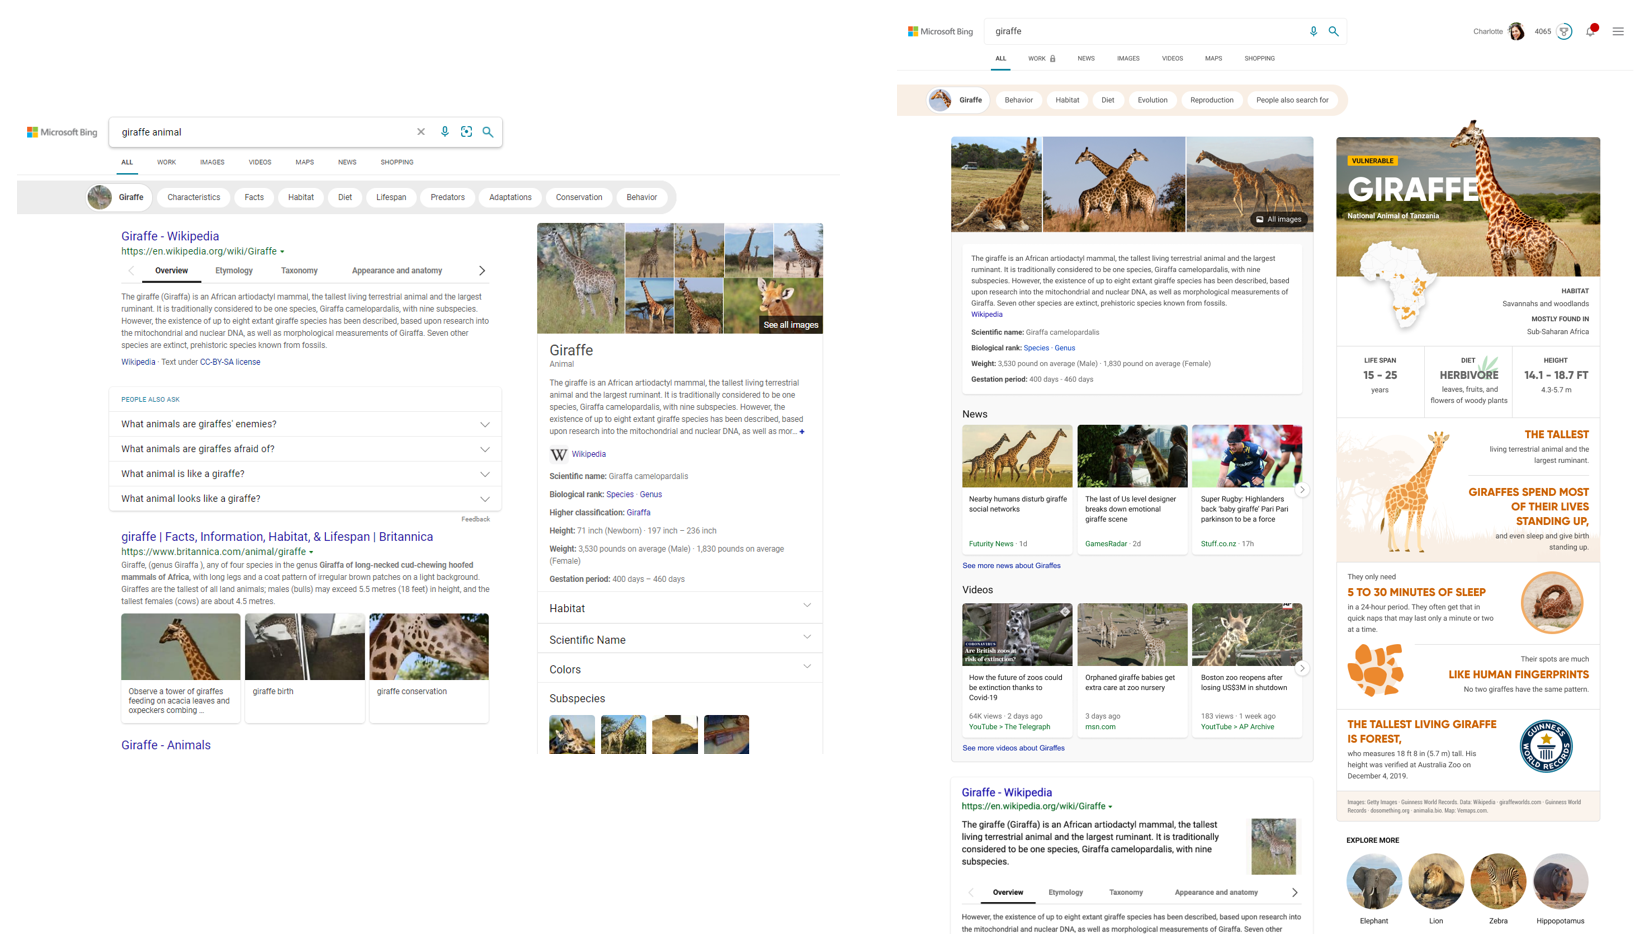 Bing: Before and After